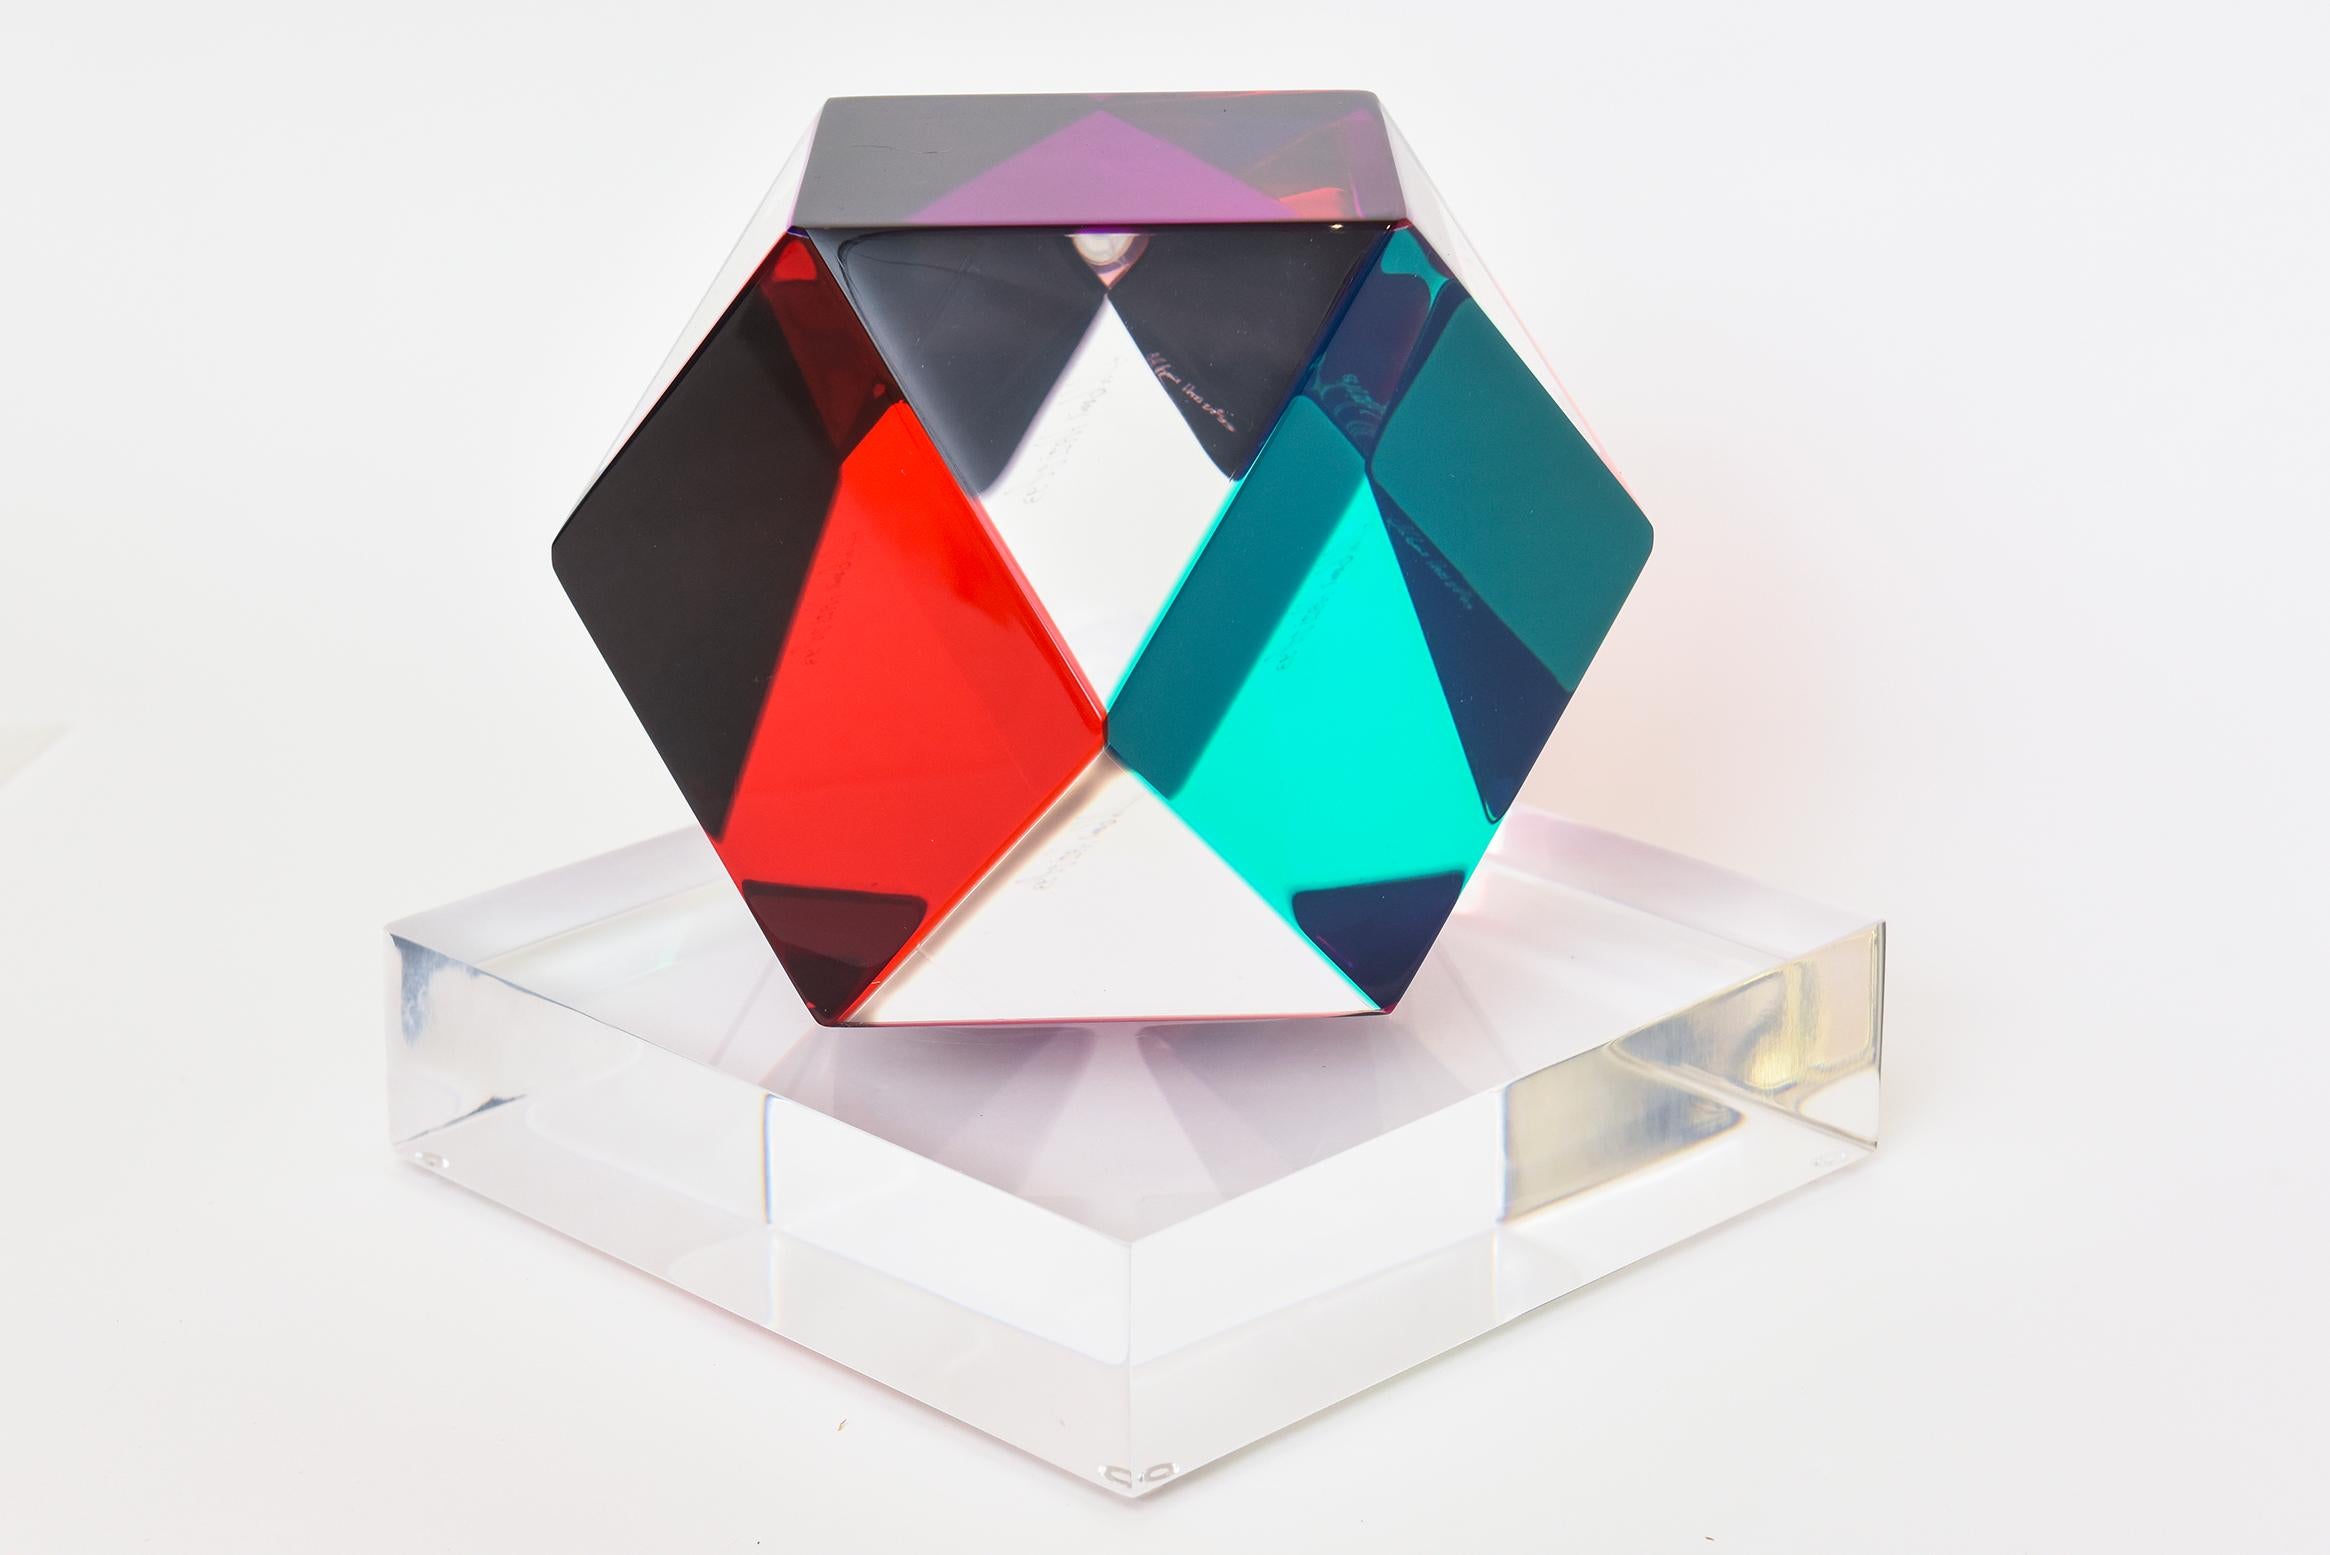 This amazing signed Haziza lucite 13 sided polygon lucite sculpture changes color when light hits it differently. It is called the Tridecagon. The initial colors you see are clear, emerald green, purple and red. Other colors come into play when it